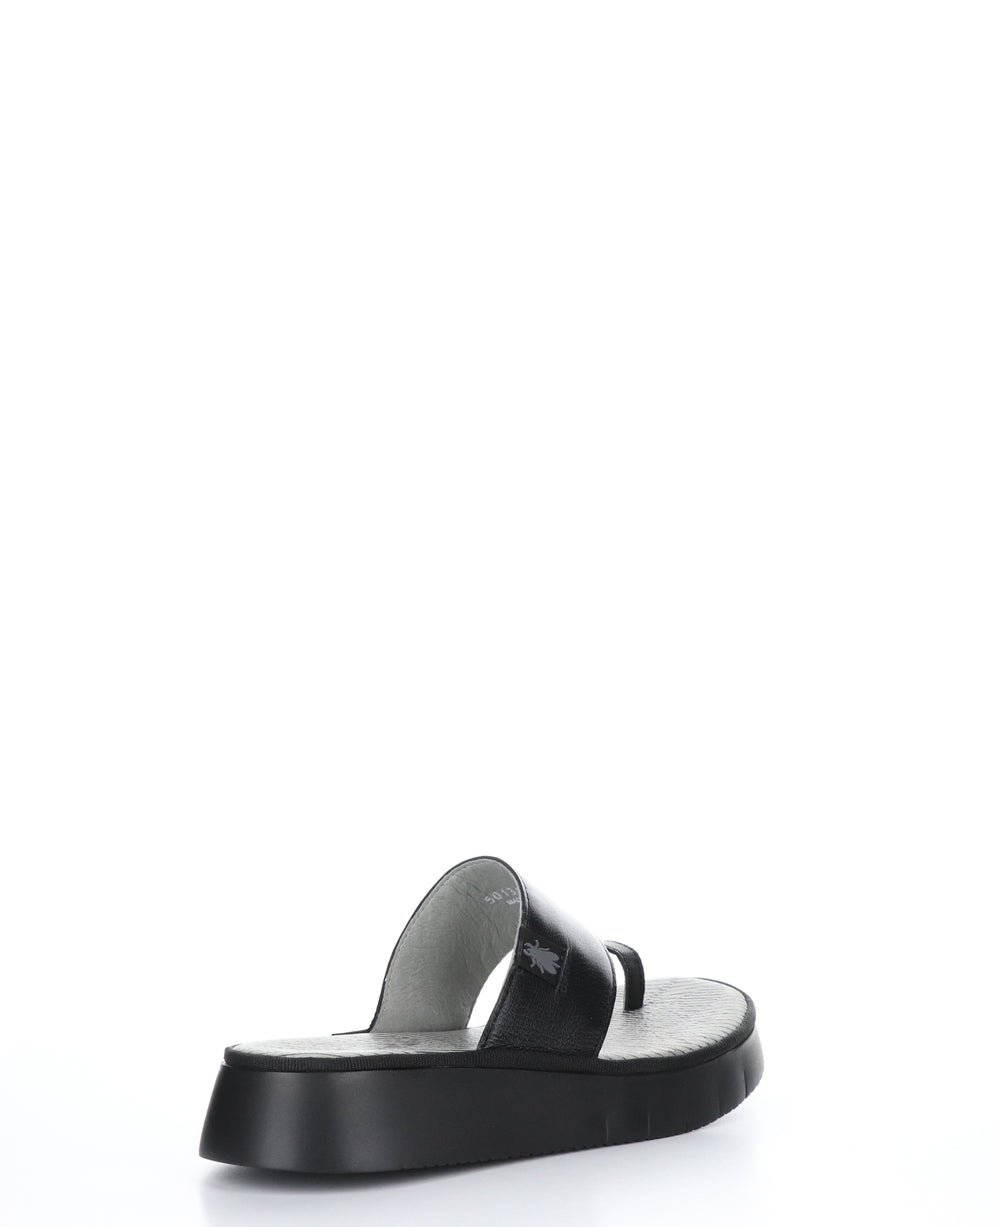 CHEV316FLY Mousse Black Strappy Sandals